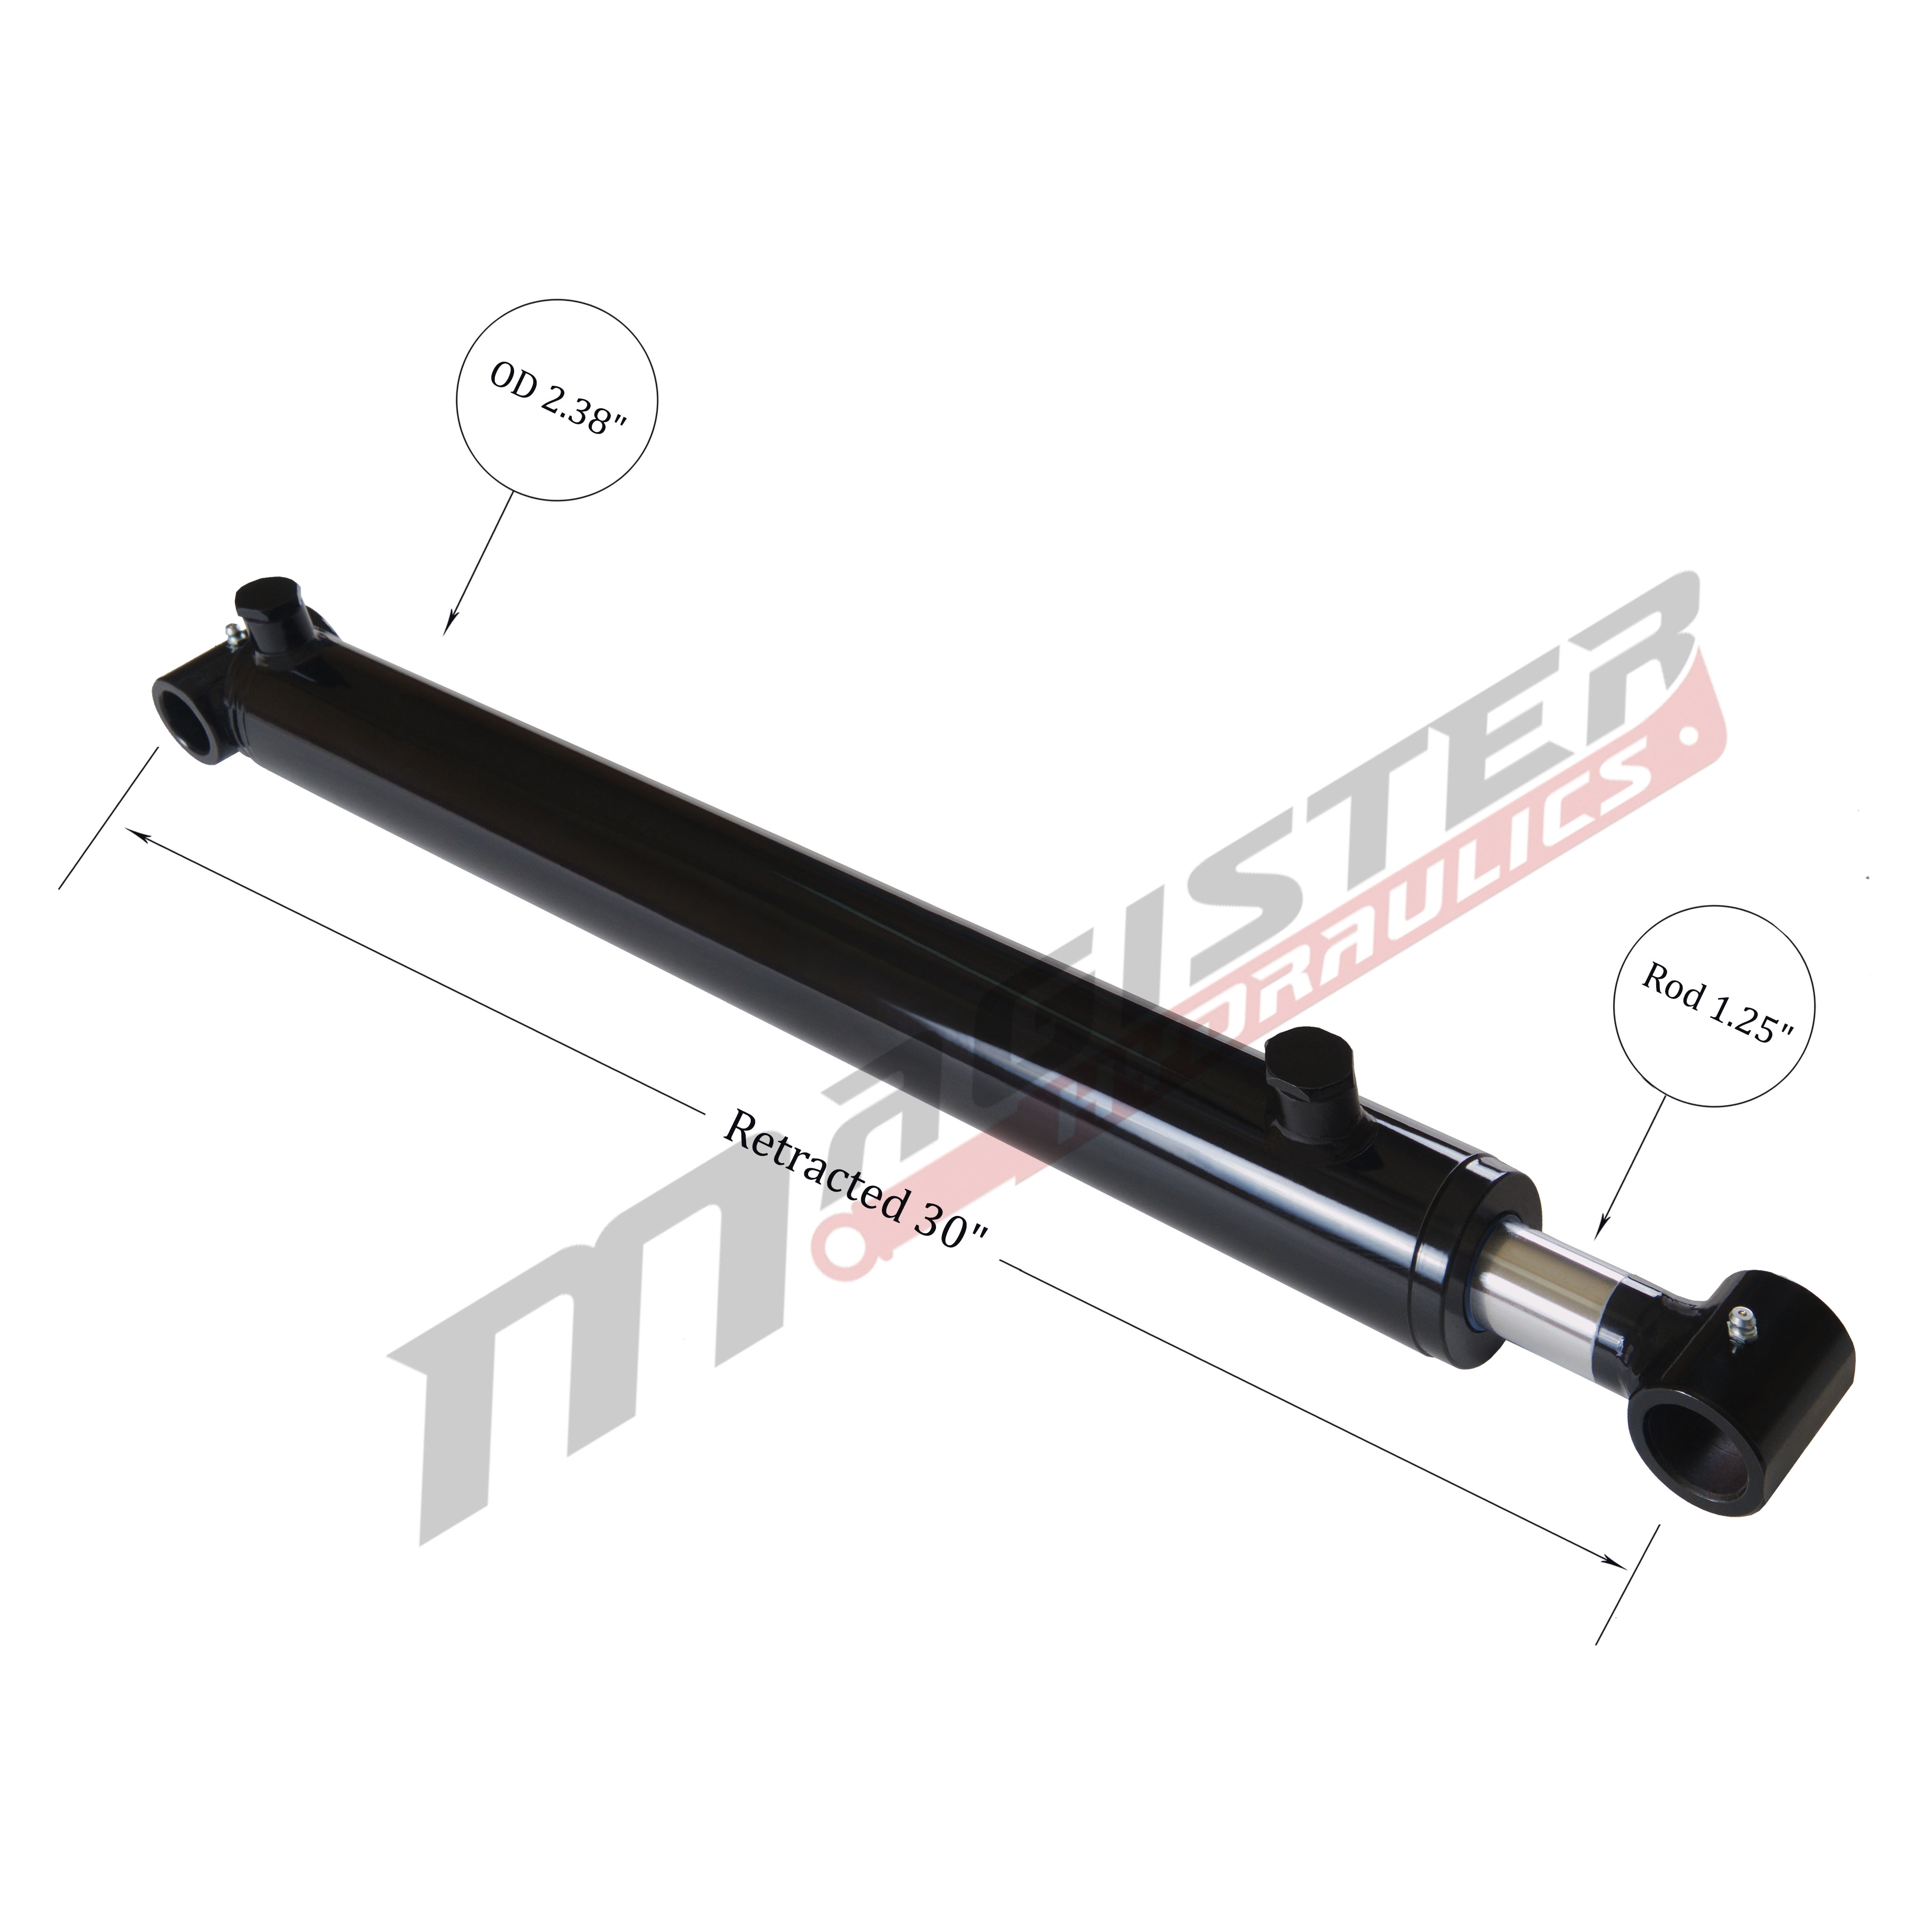 2 bore x 22 stroke hydraulic cylinder, welded cross tube double acting cylinder | Magister Hydraulics